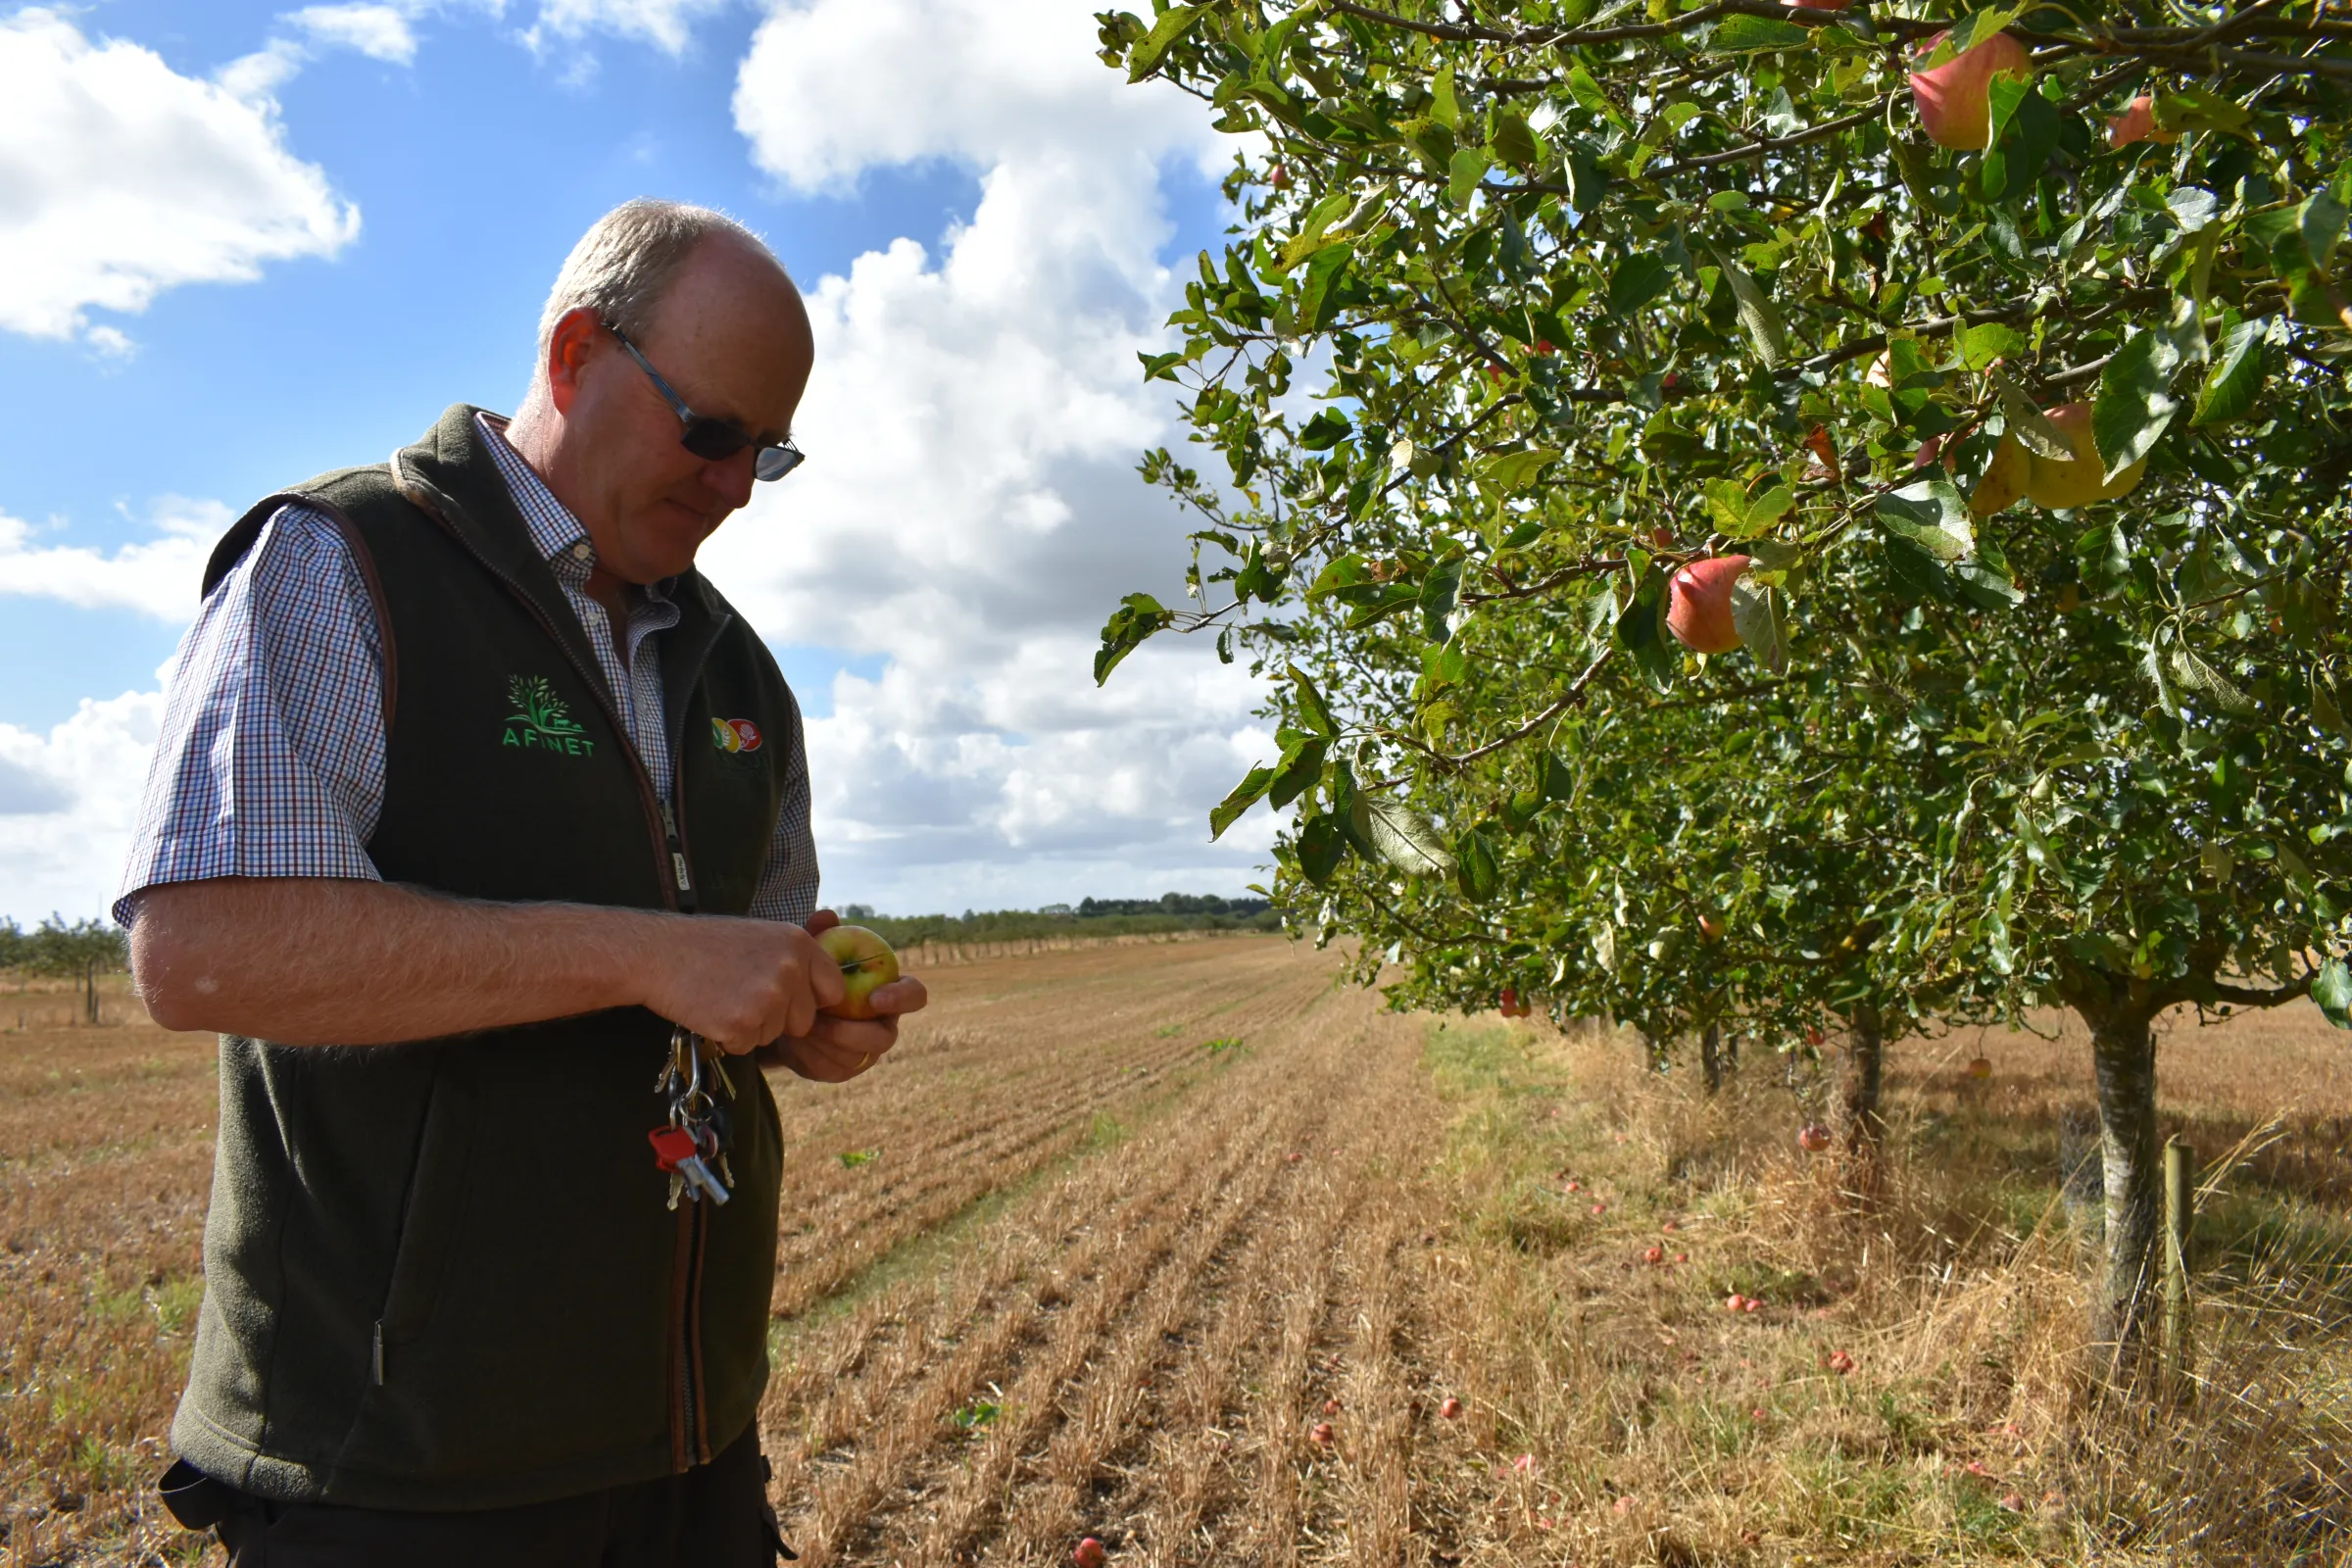 Soil scientist Stephen Briggs inspects the organic apple crop growing in wheat fields on his farm near Peterborough, east England, September 7, 2022.  Thomson Reuters Foundation/Rachel Parsons